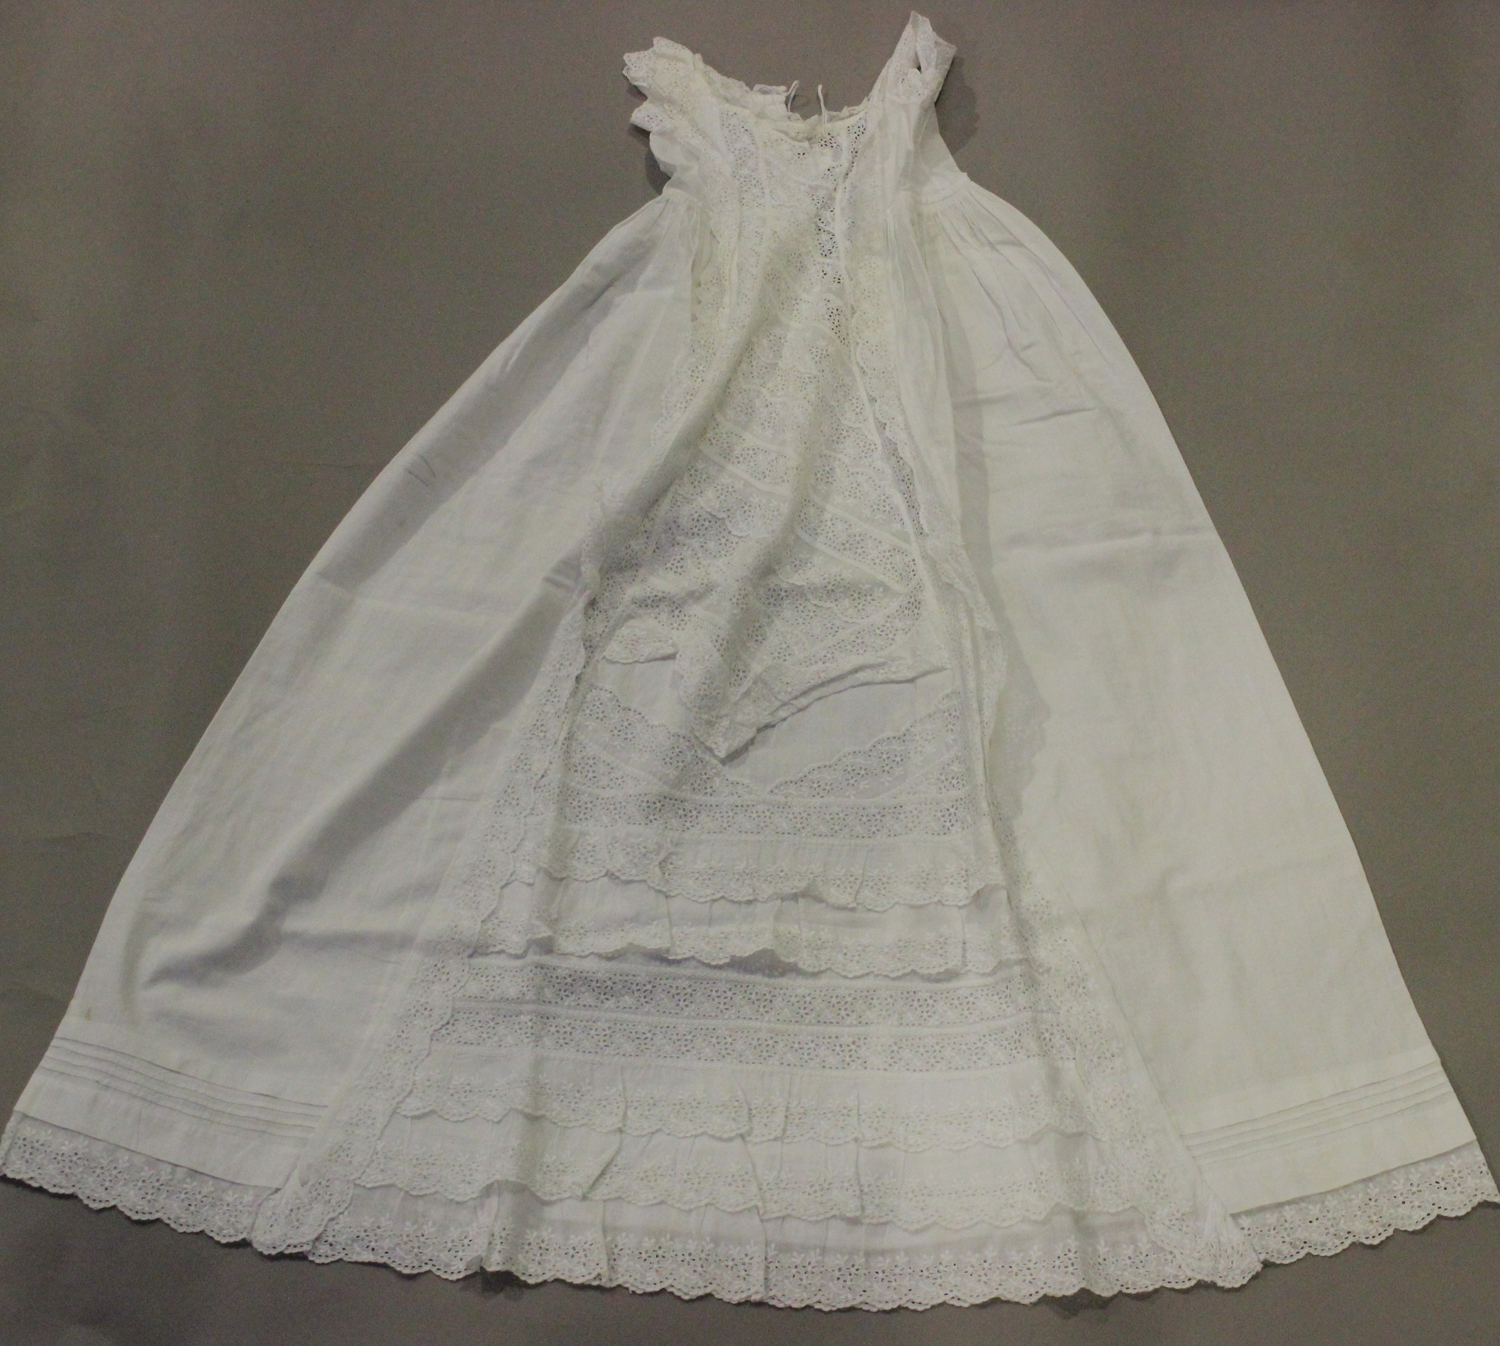 A good collection of mainly Victorian and Edwardian infants' clothing, including embroidered linen